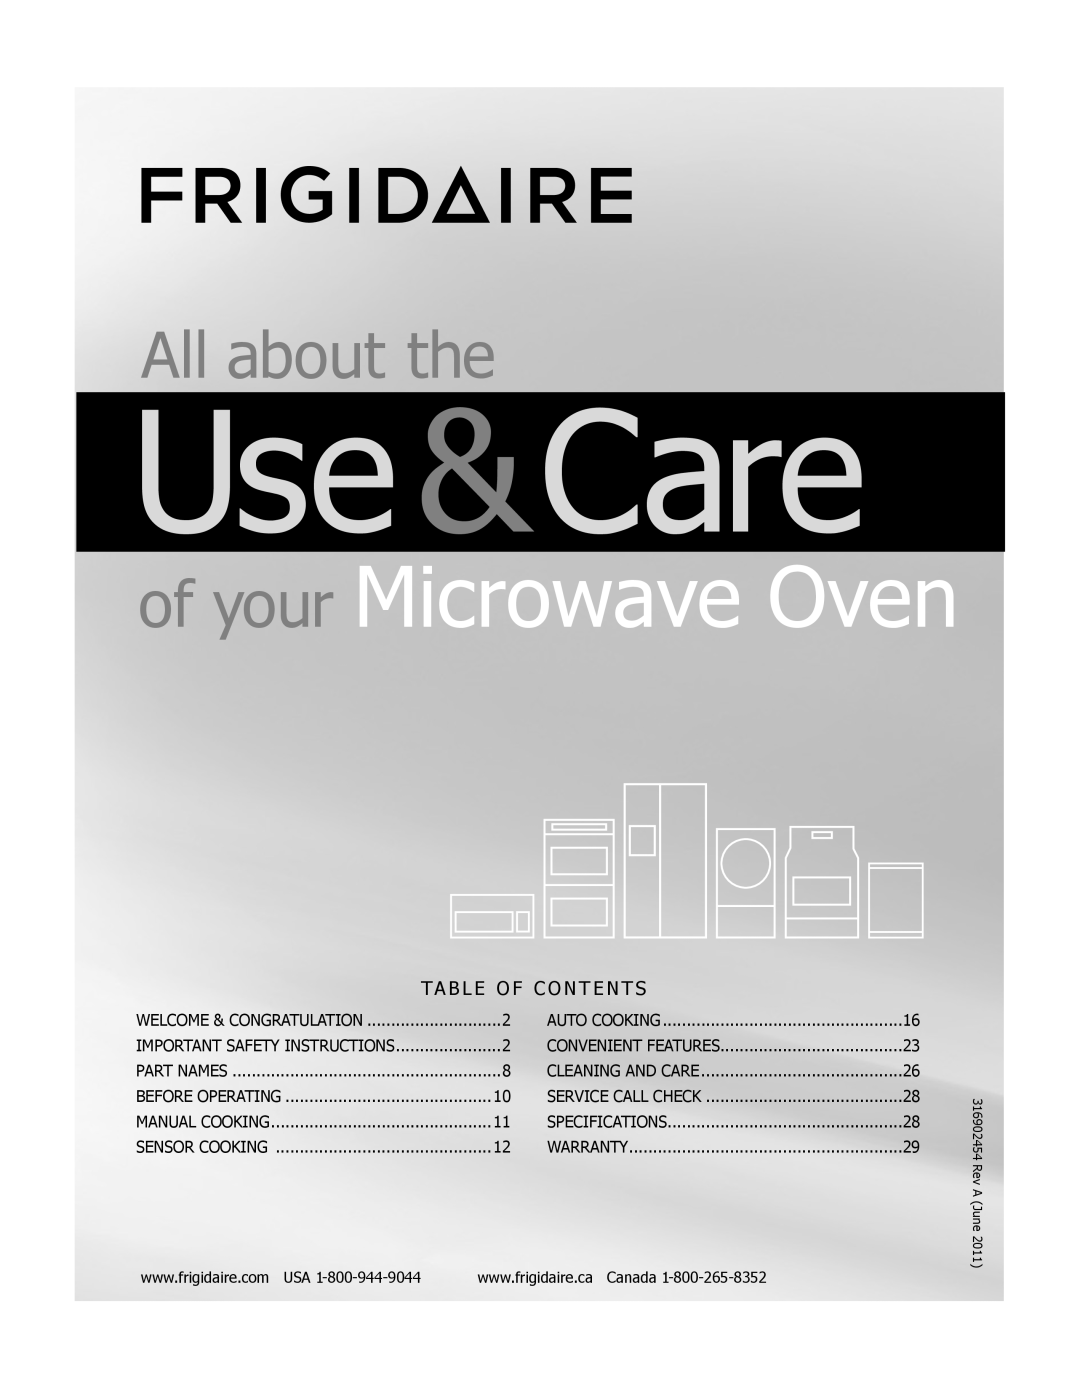 Frigidaire FGBM205KF, FPBM189KF manual Use &Care, of your Microwave Oven, All about the, Ta B L E O F C O N T E N T S 